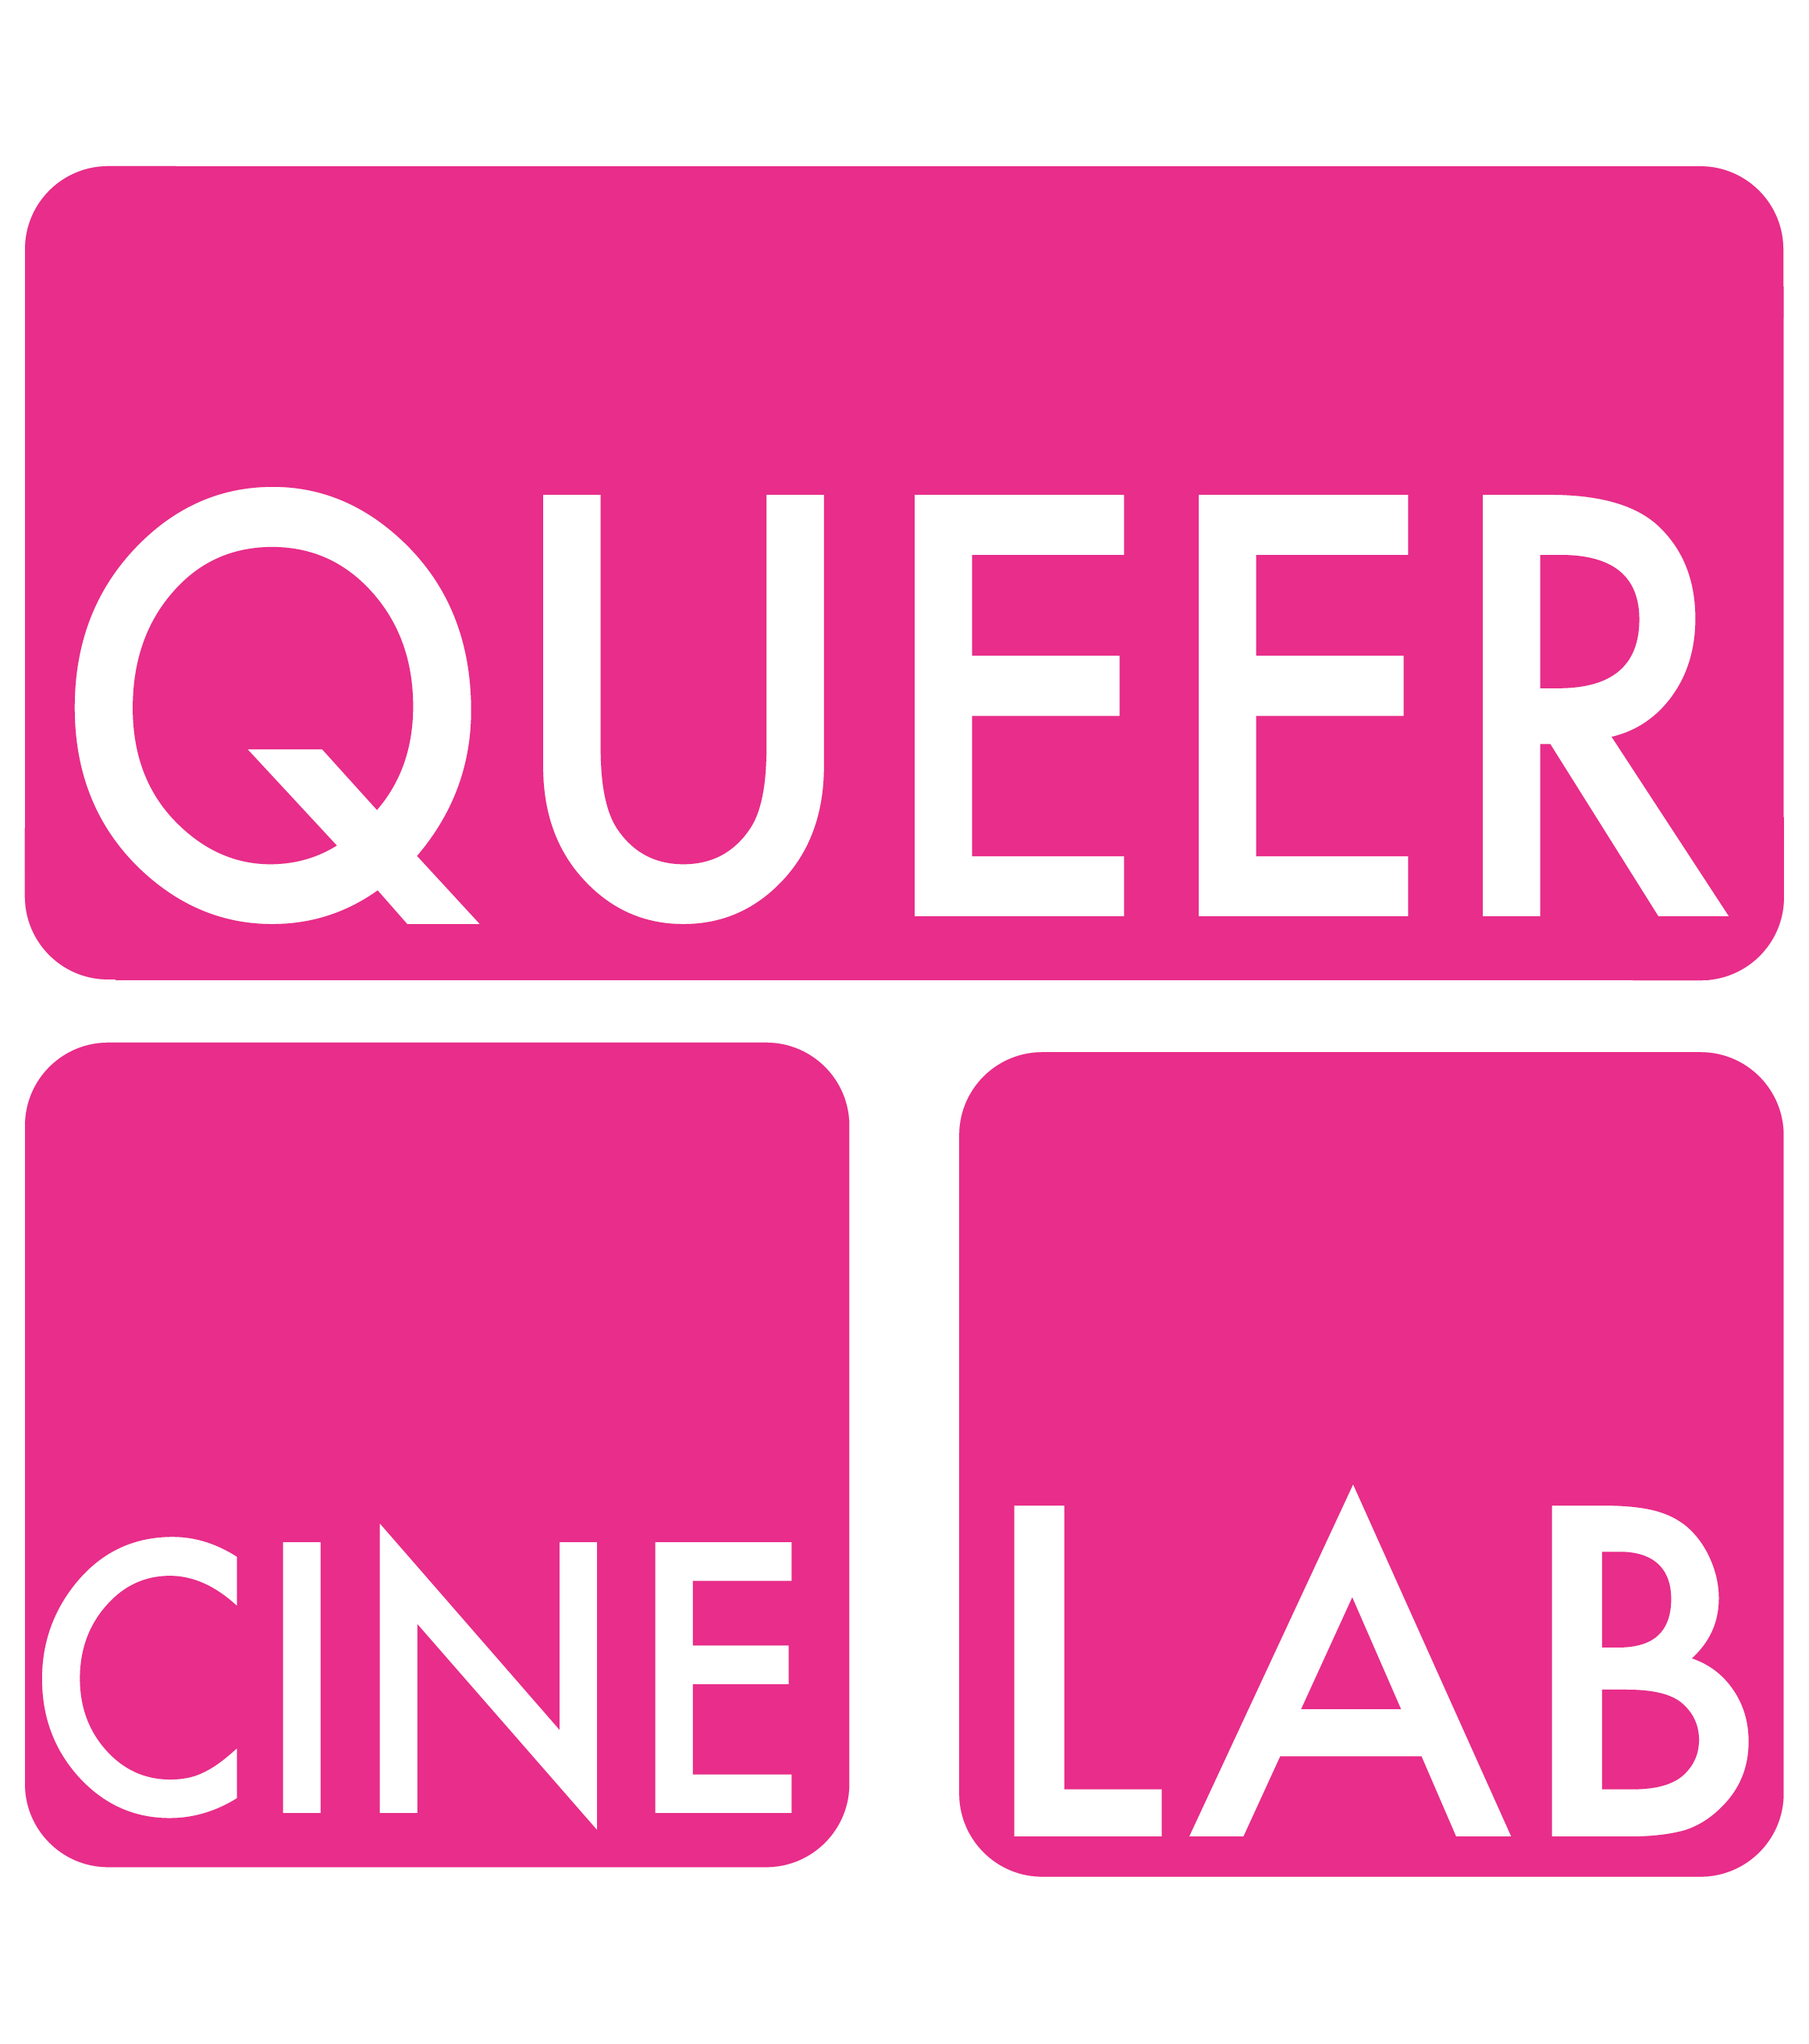 cropped-LOGOqueercinelab_nd1.png